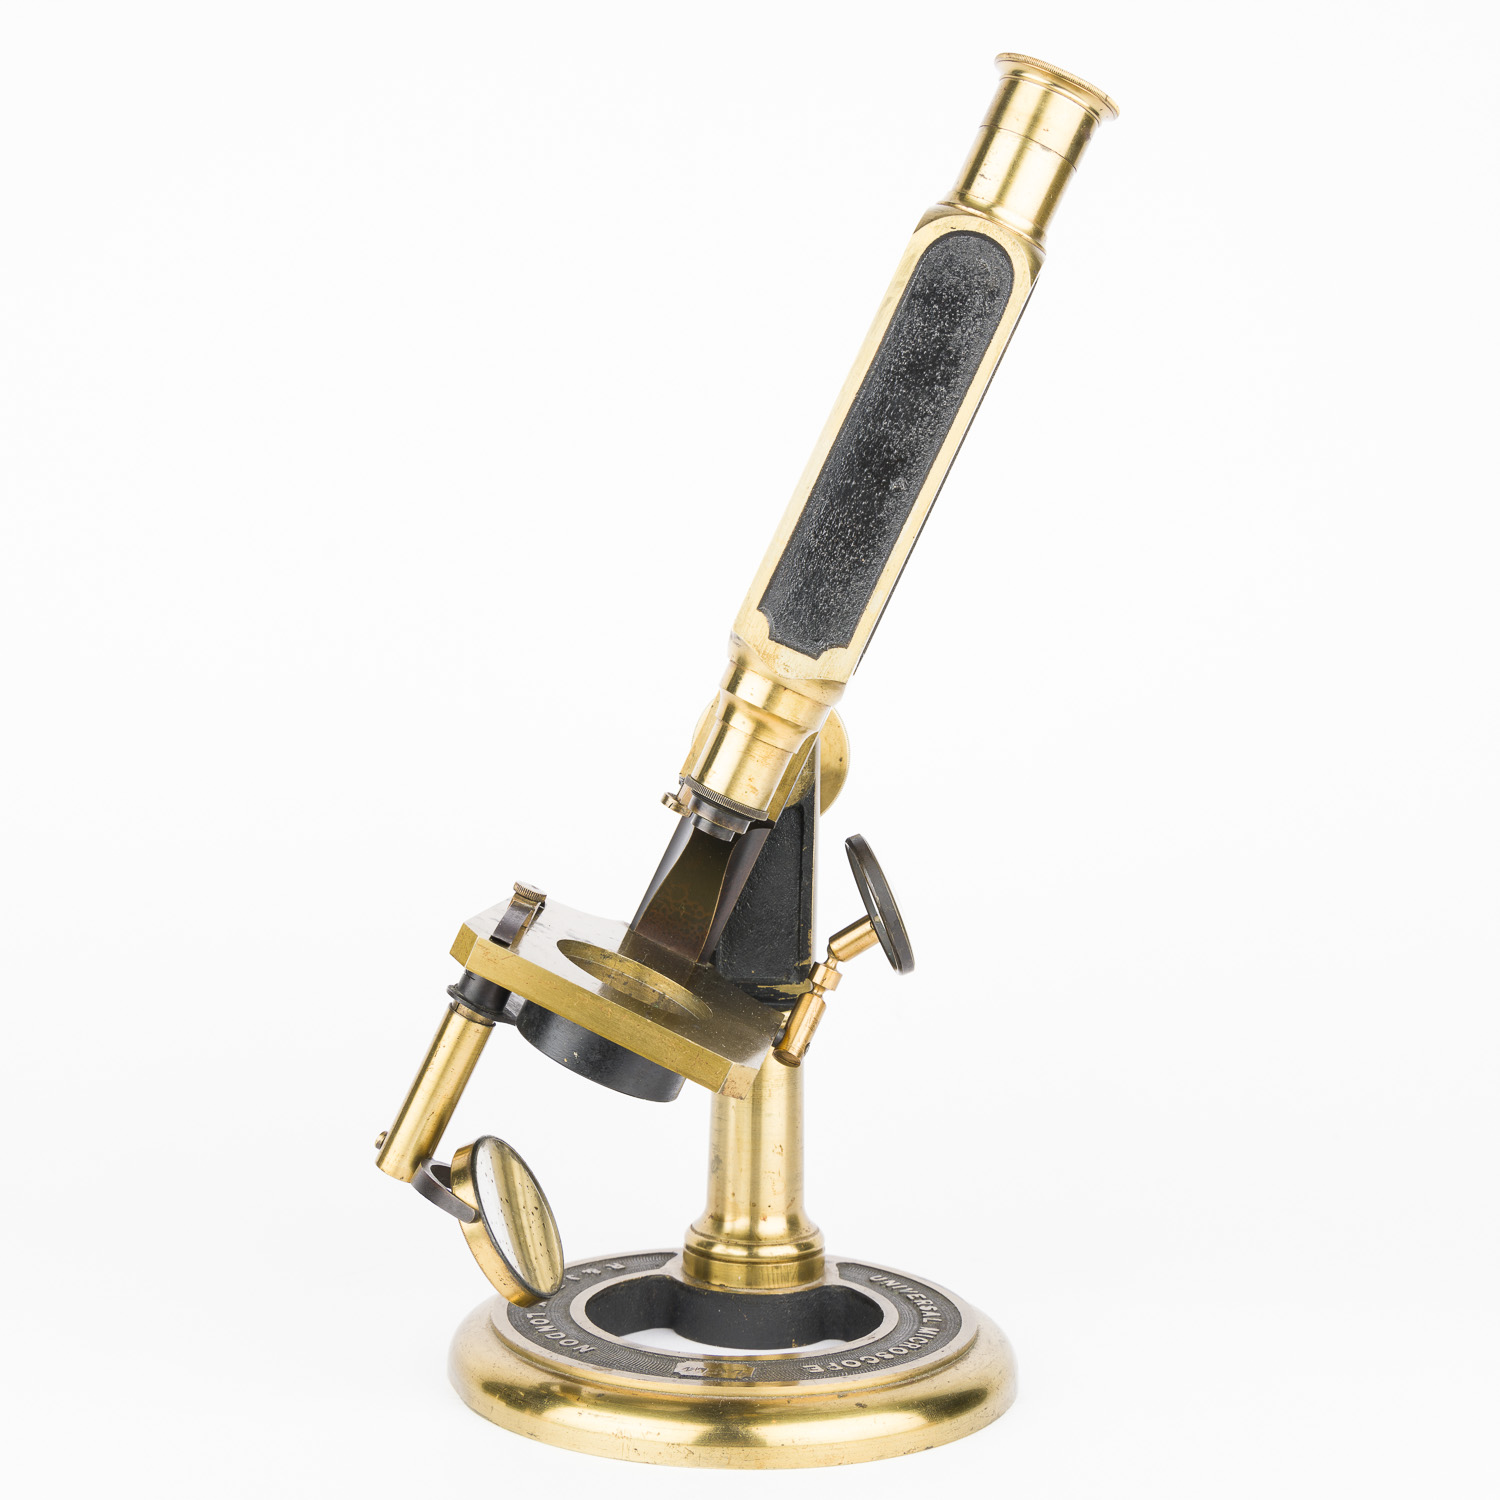 Universal Microscope by R & J Beck of London.